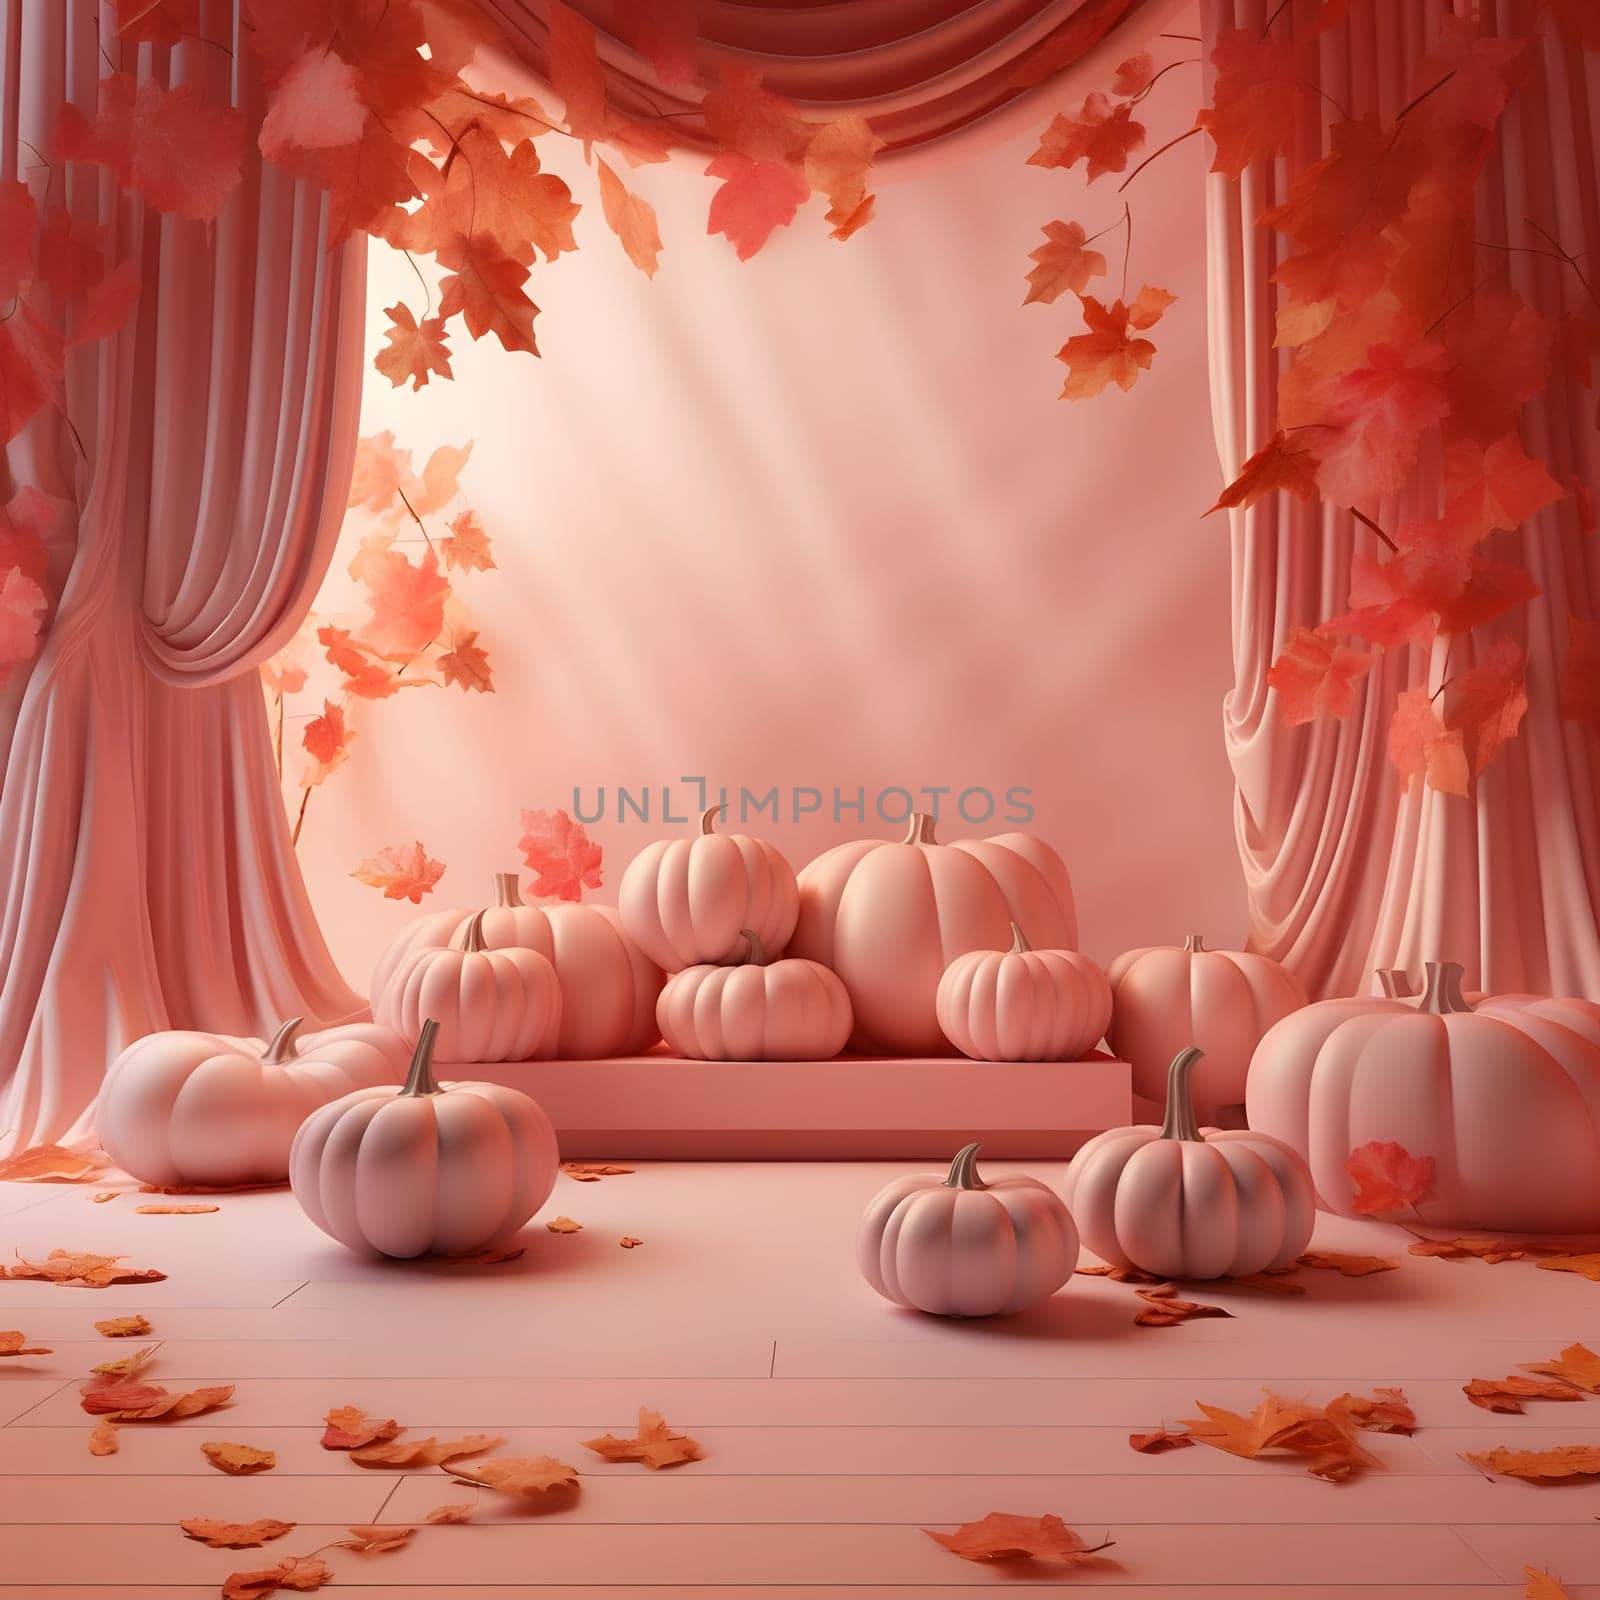 Elegant scenery with curtains, pumpkins and autumn leaves. Pumpkin as a dish of thanksgiving for the harvest. by ThemesS